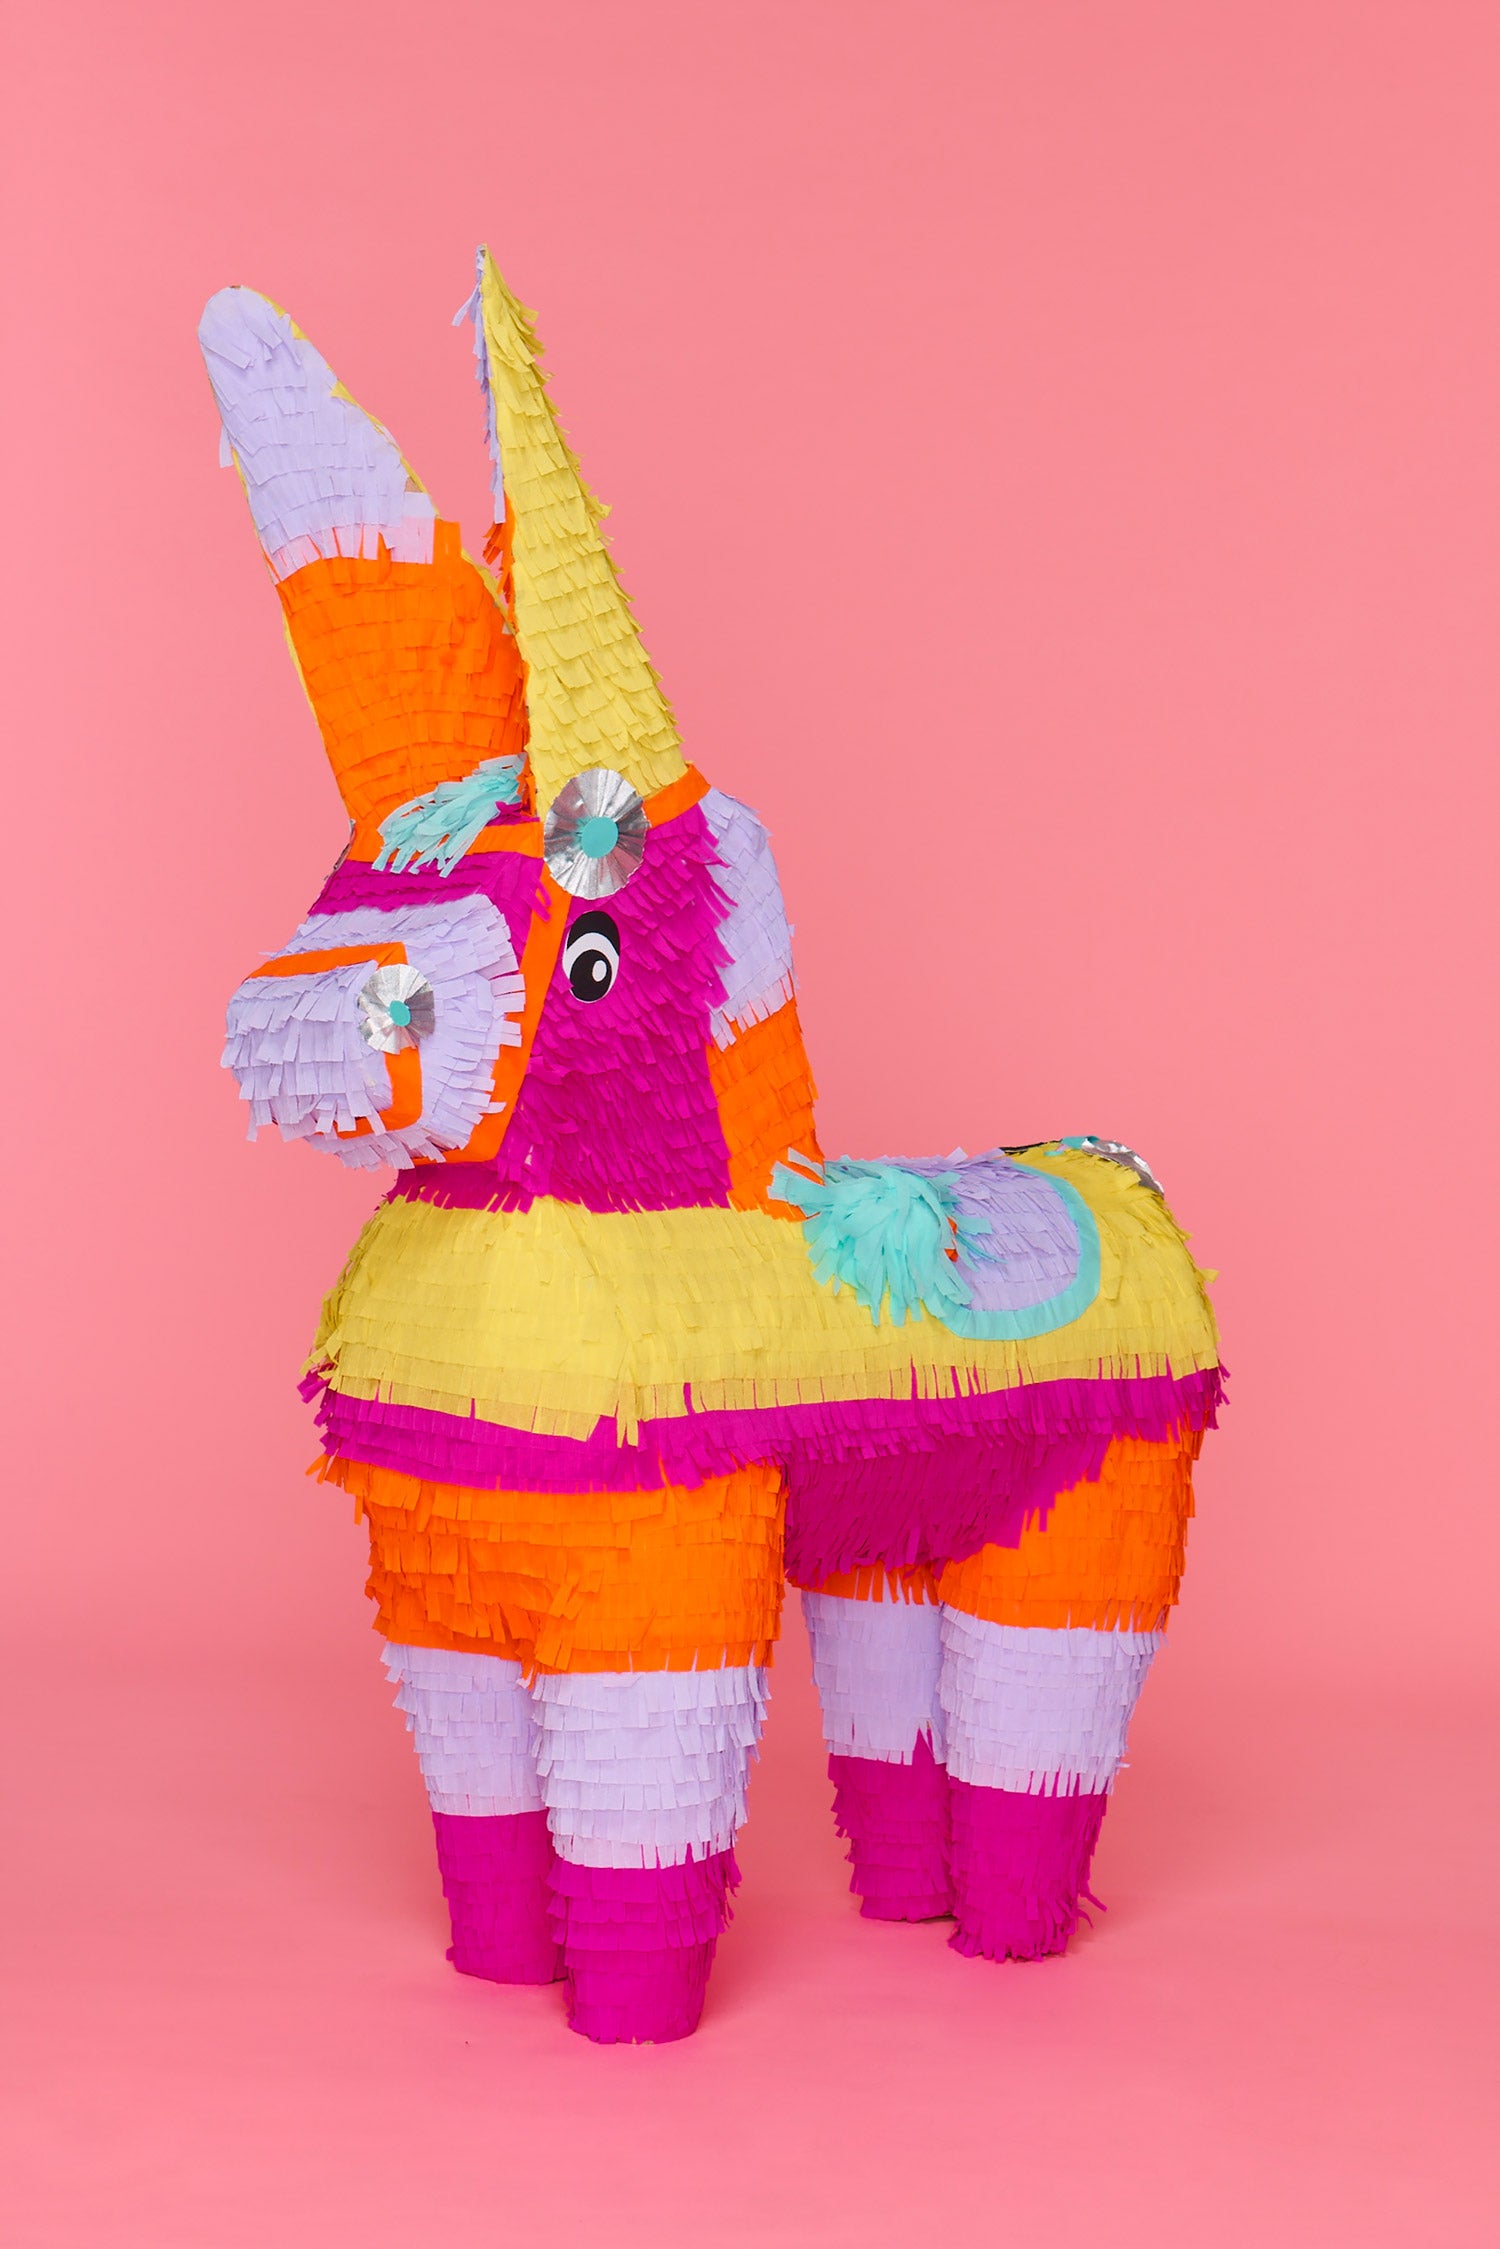 A giant, colorful, oversized, handmade donkey piñata stands against a pink background. 